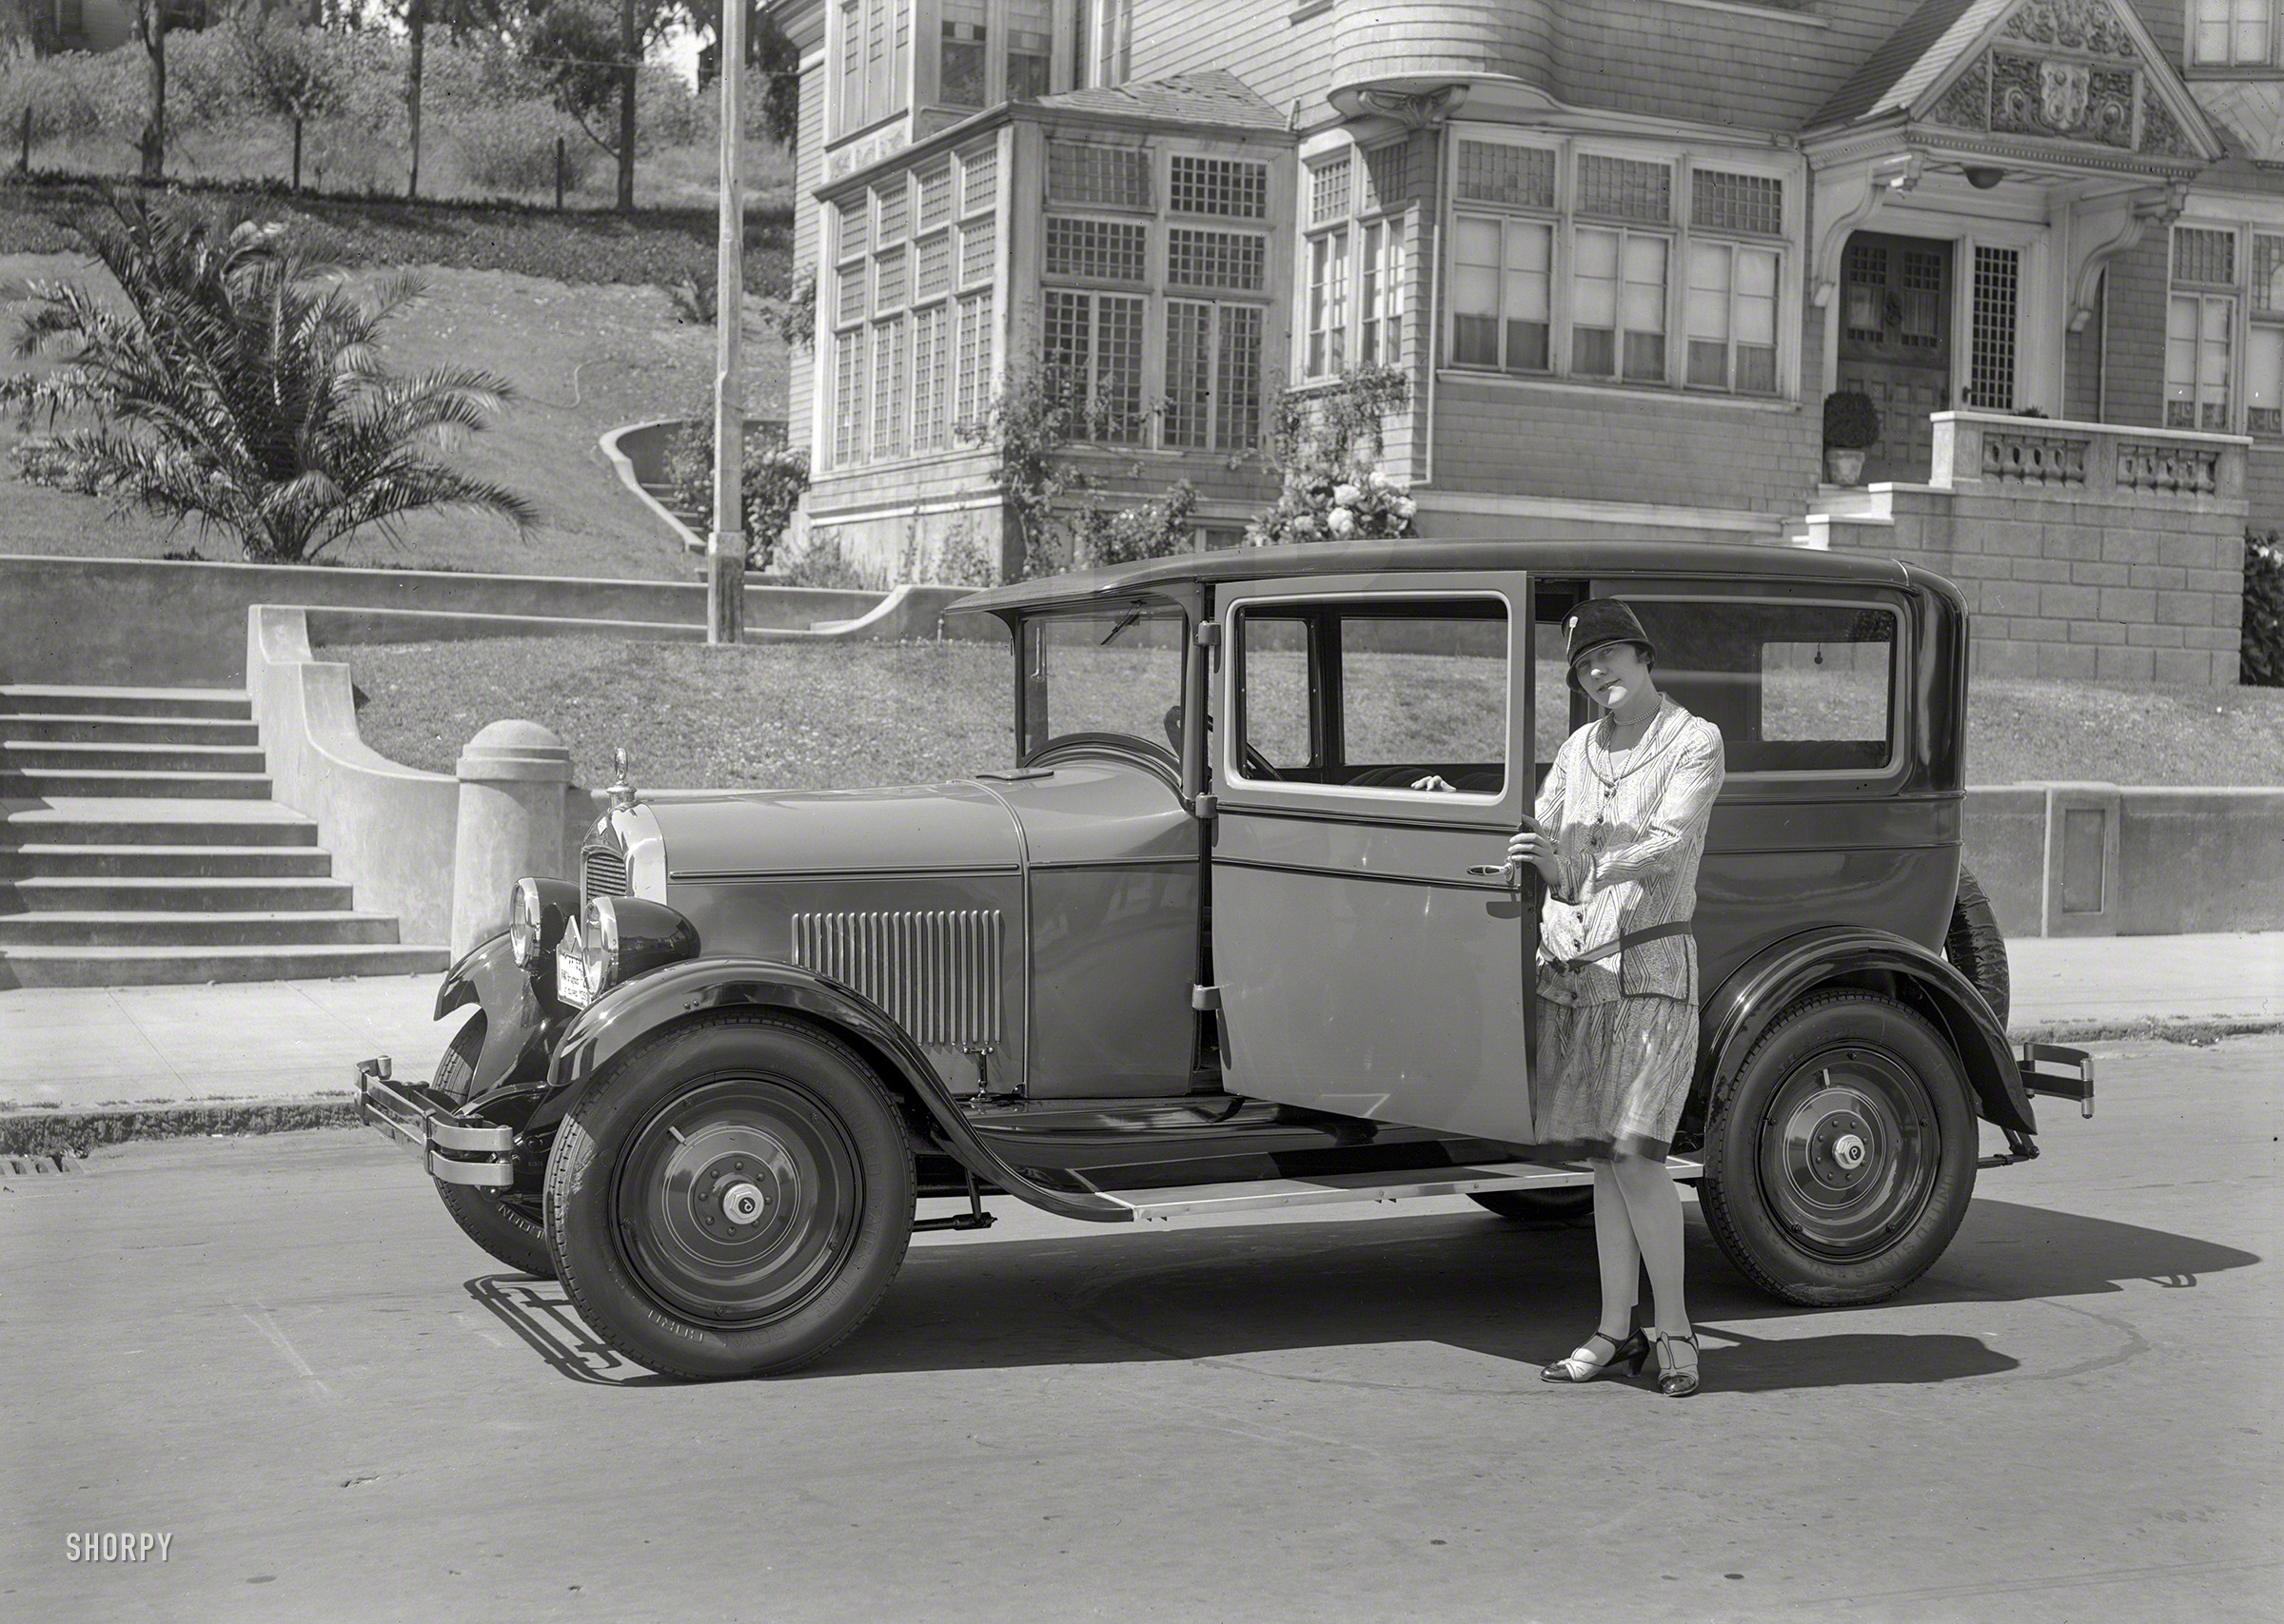 San Francisco circa 1927. "Paige 6-45 Brougham -- $1350 as equipped," it says on the front of the car. 5x7 glass negative by Christopher Helin. View full size.